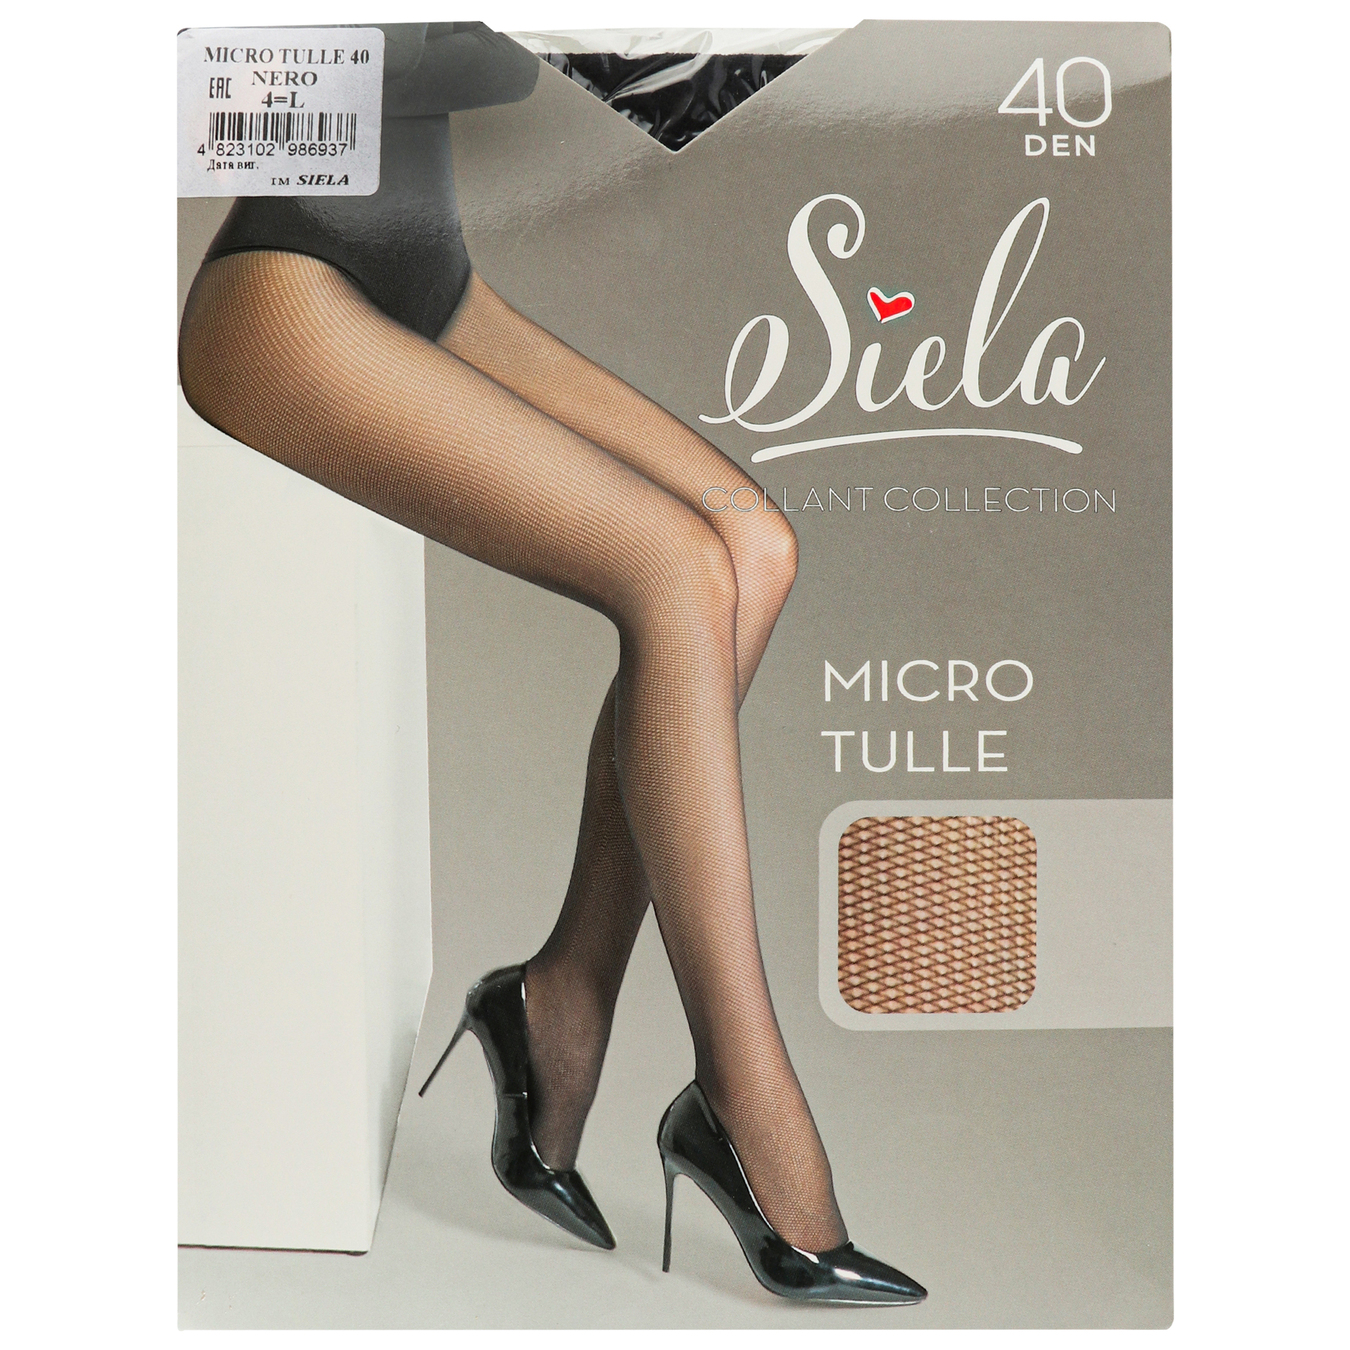 Women's tights Siela Tulle 40den nero size 4 ᐈ Buy at a good